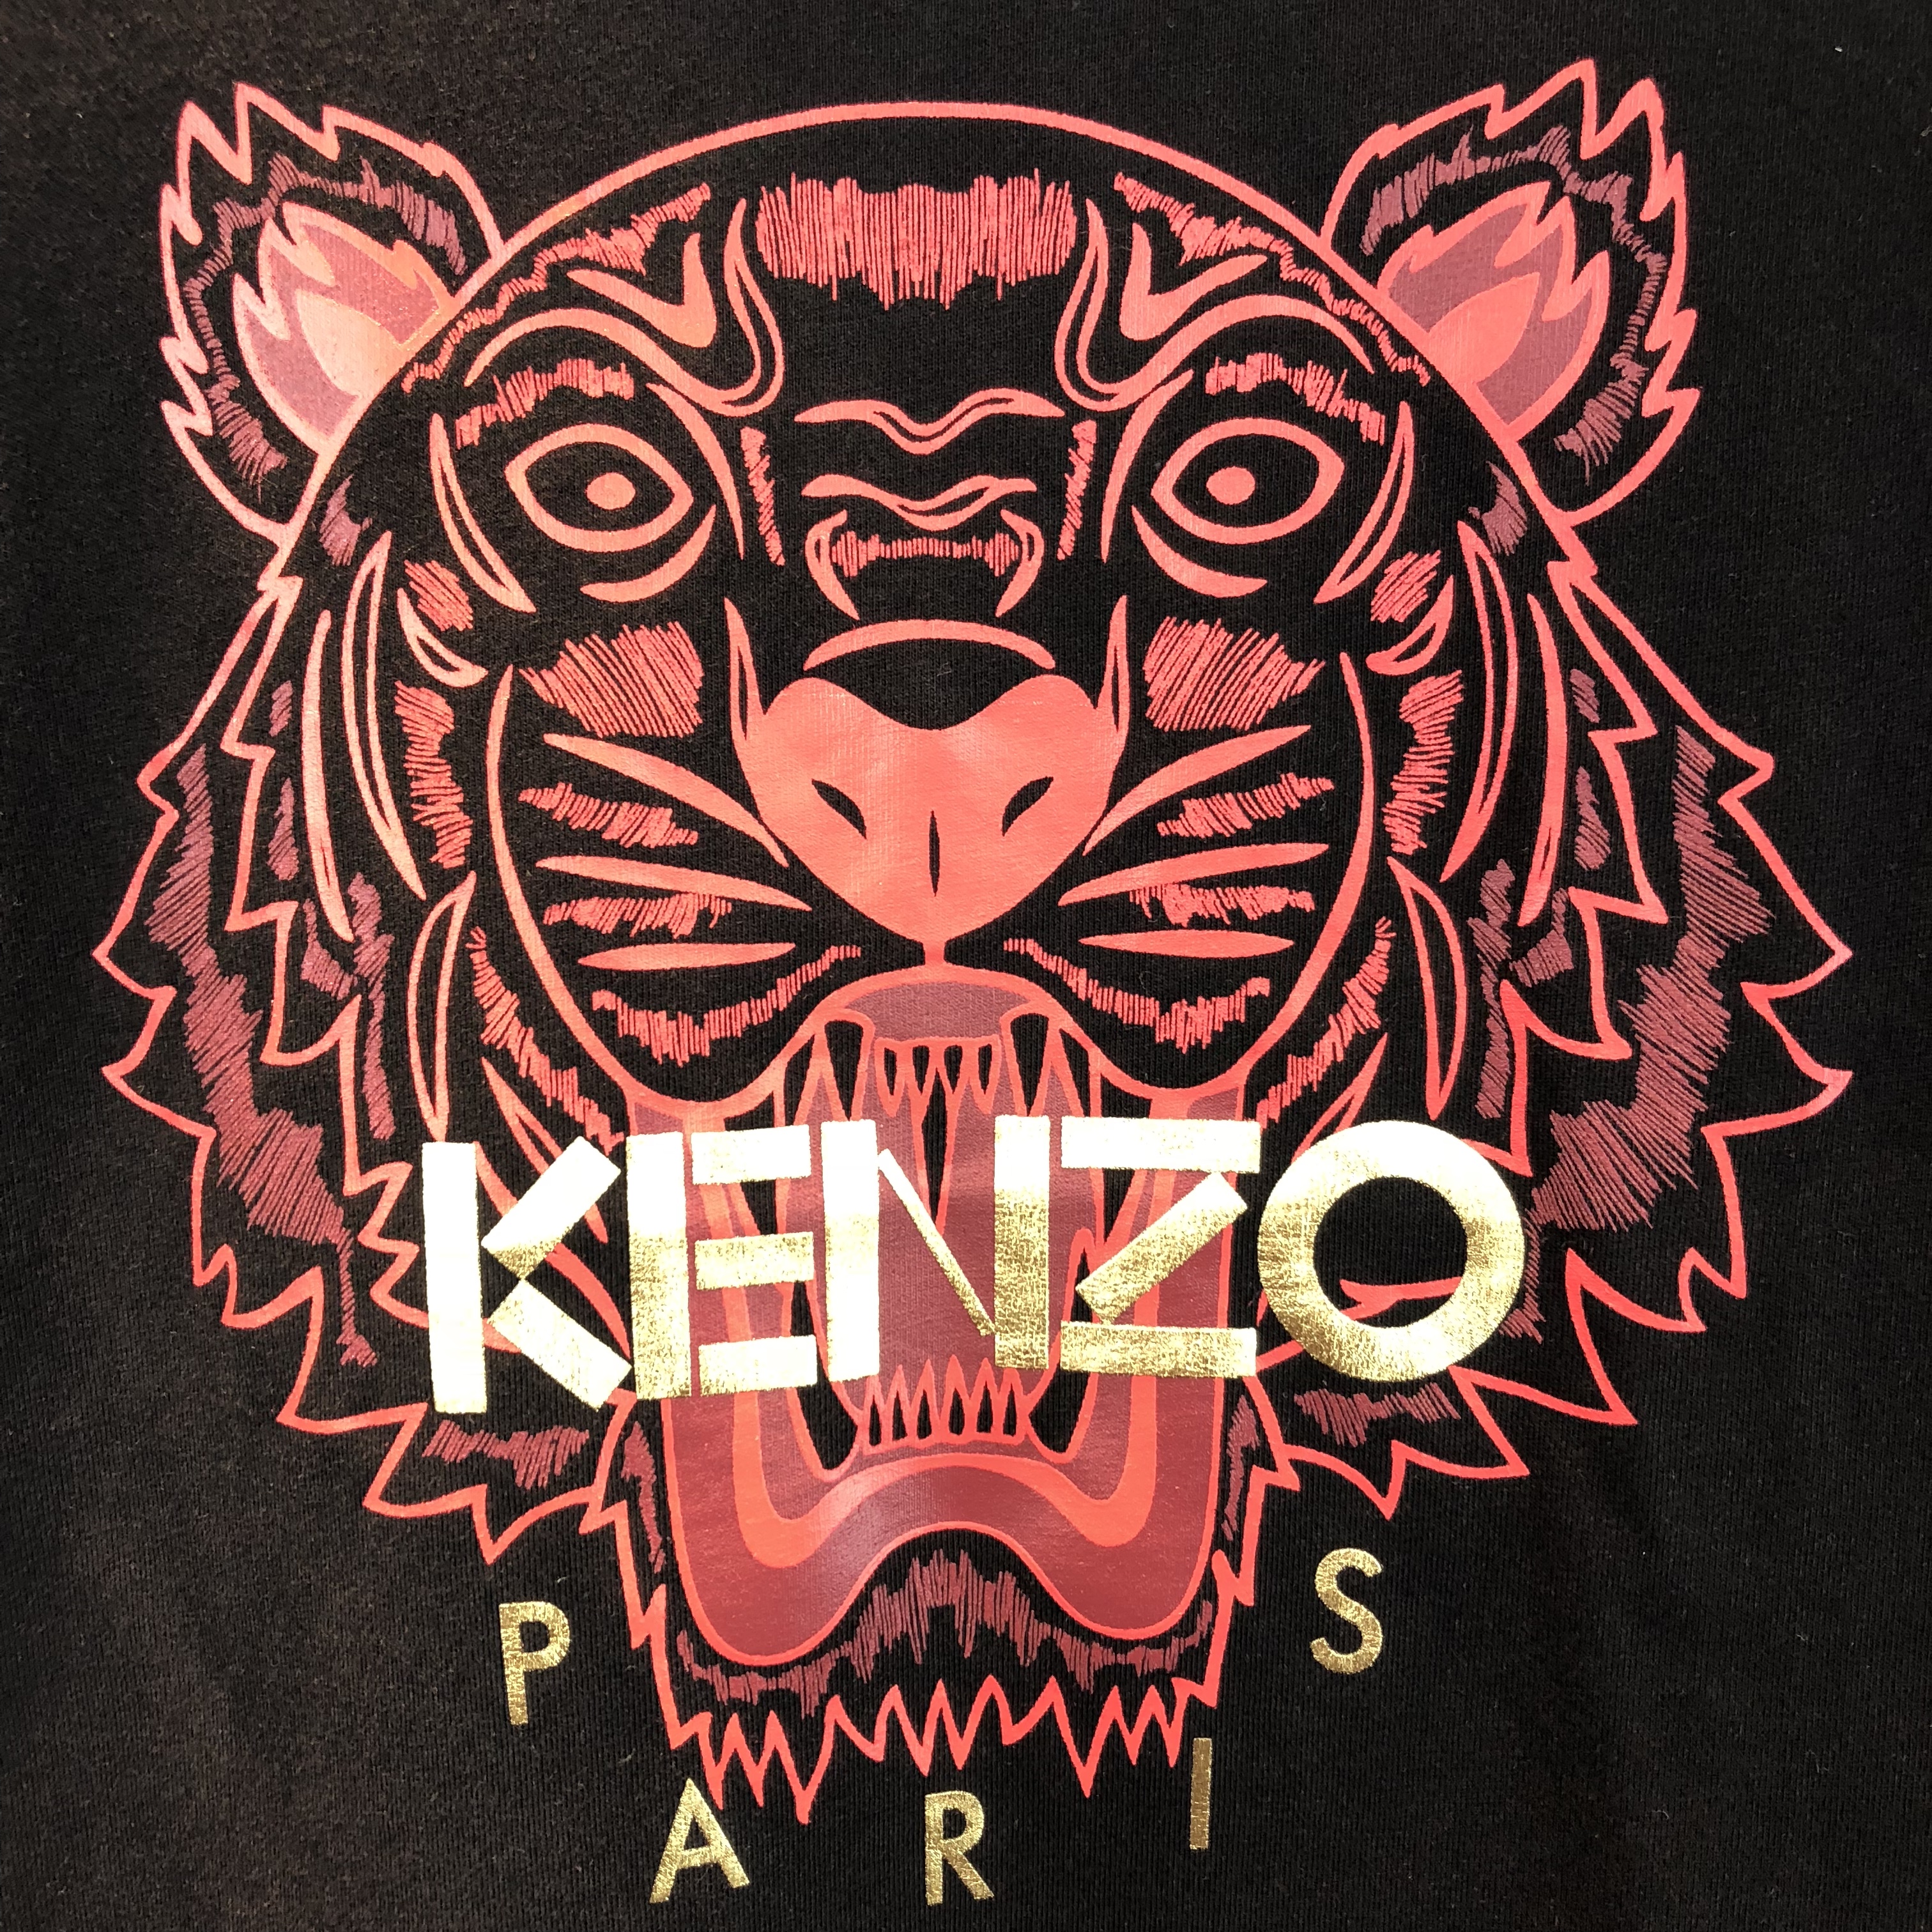 kenzo t shirt black and red